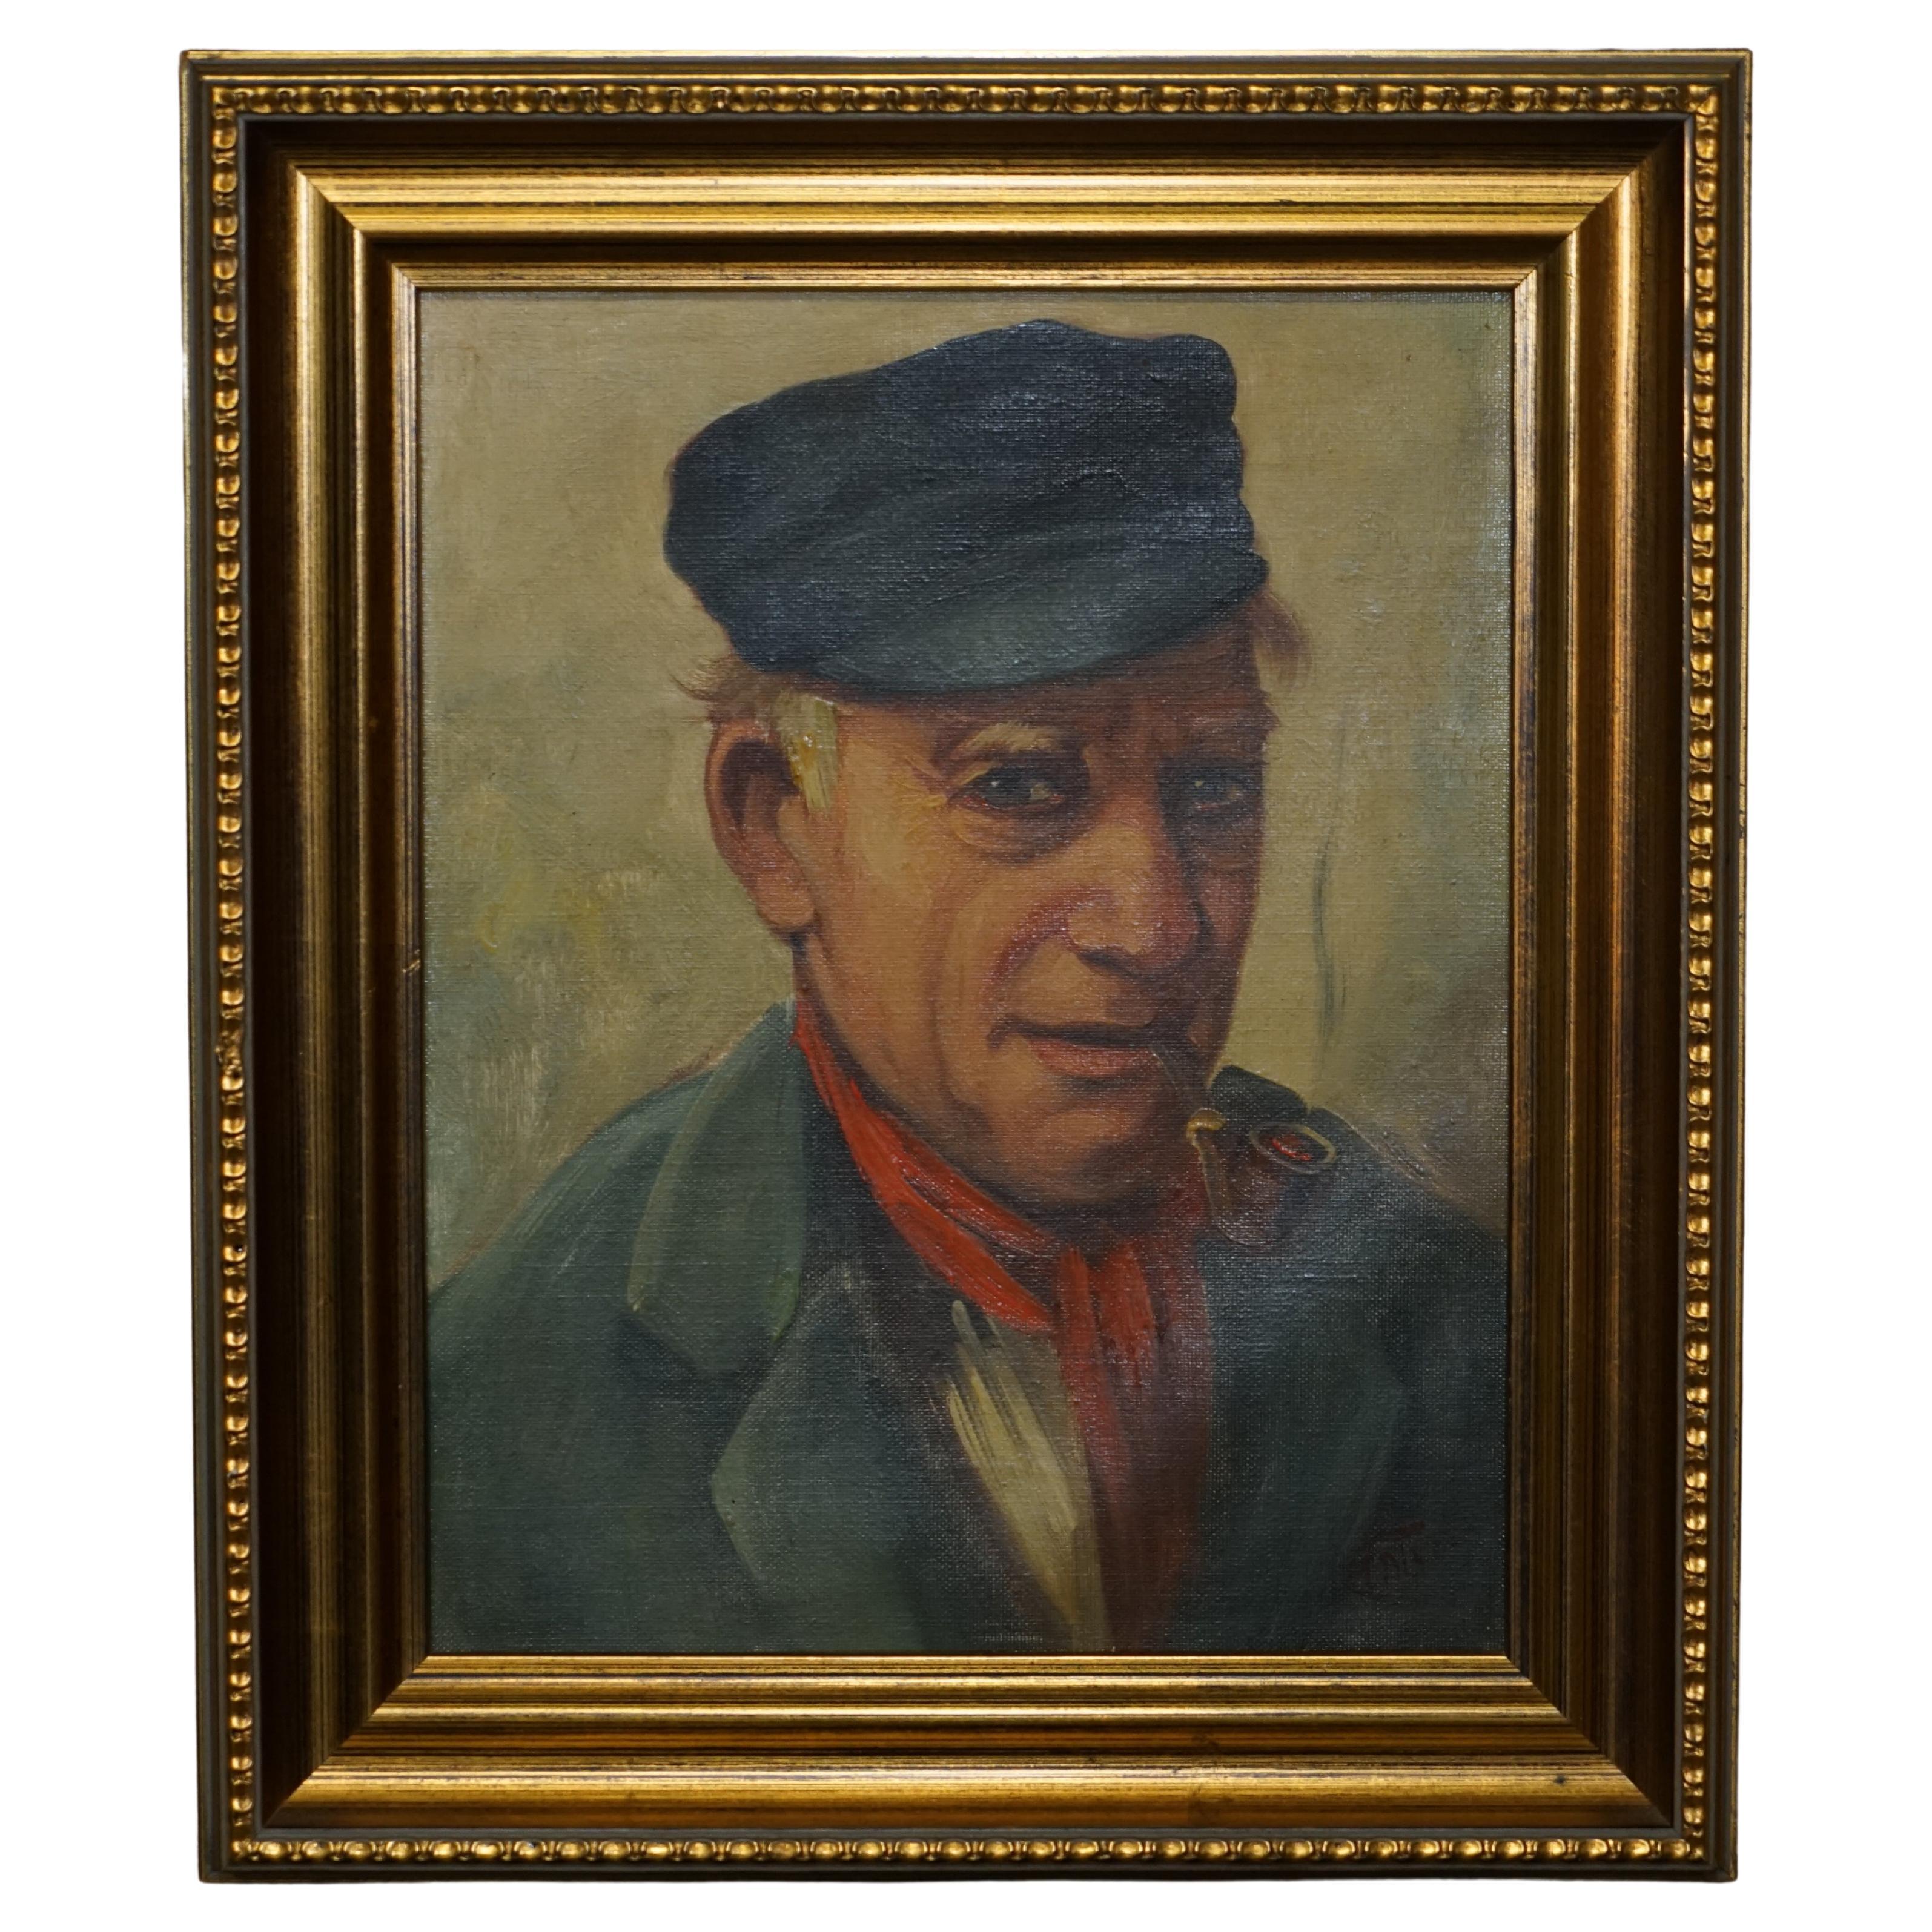 Antique Signed Dutch Oil on Canvas Painting of Old Man Fisherman Smoking a Pipe For Sale